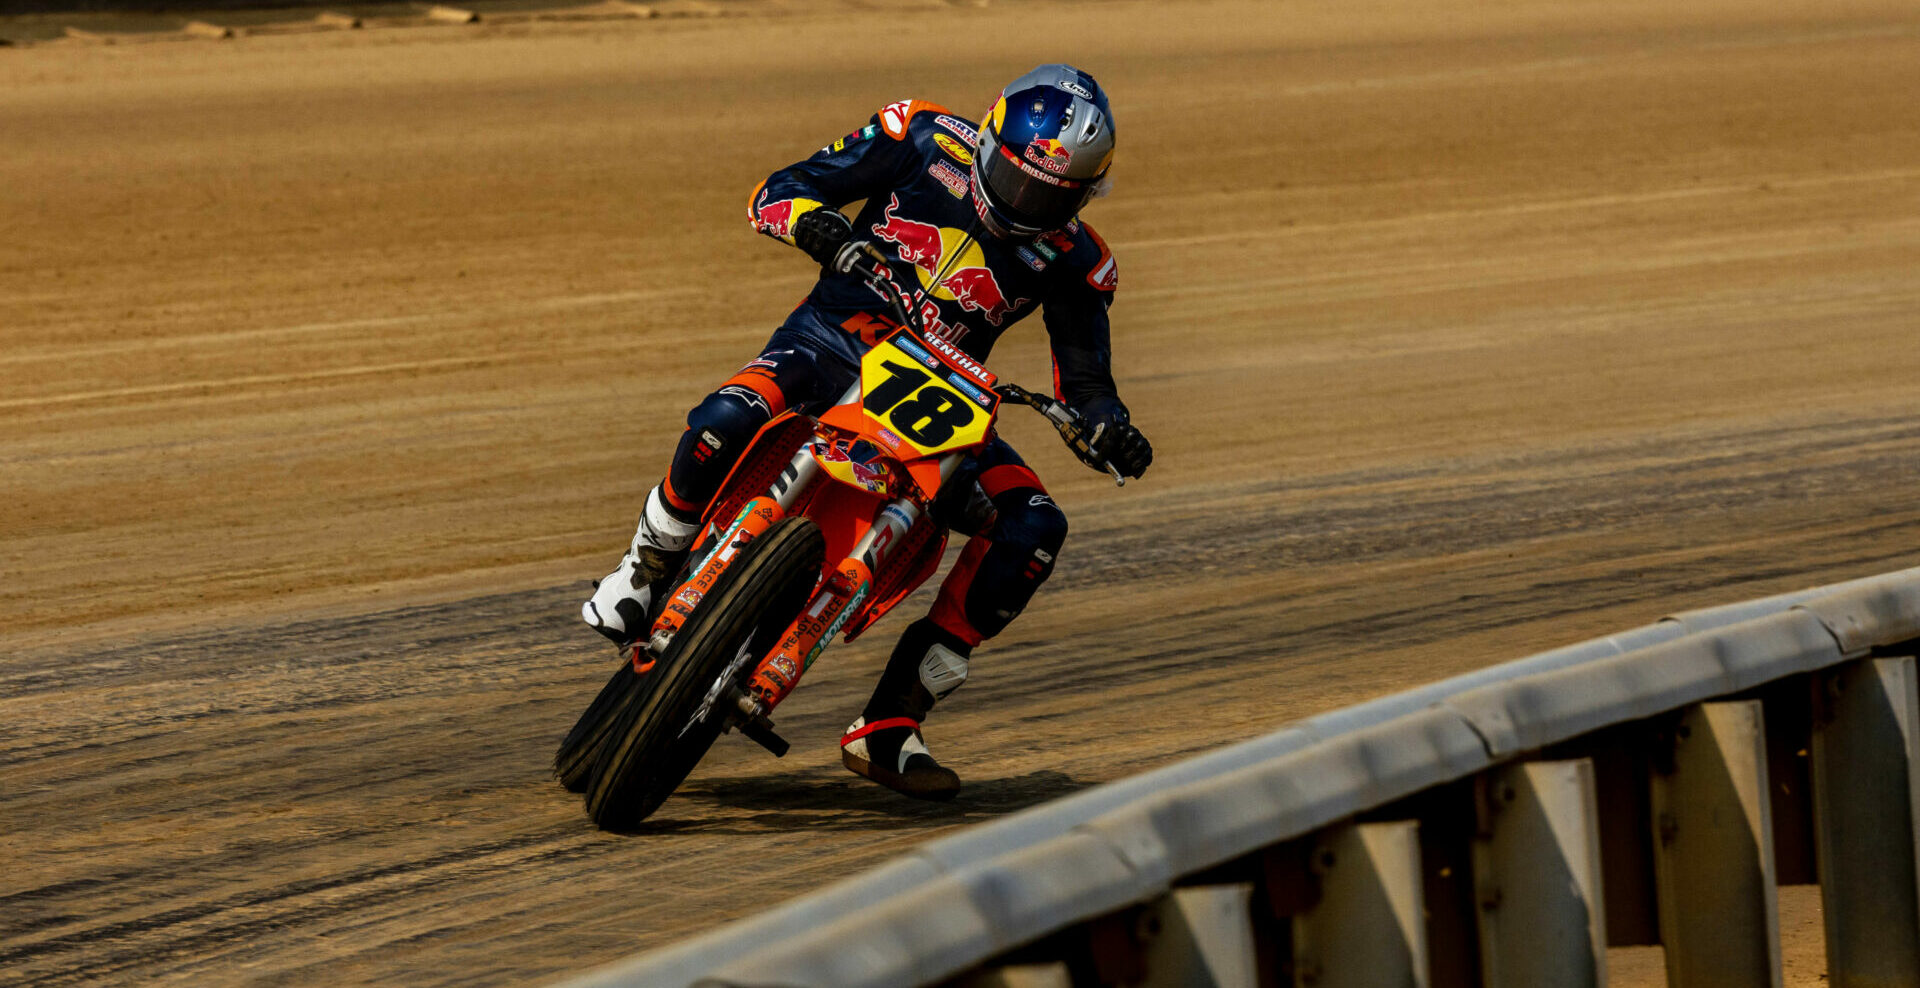 Max Whale (18) finished fourth in the AFT Singles race at the DuQuoin Mile. Photo courtesy Red Bull KTM.